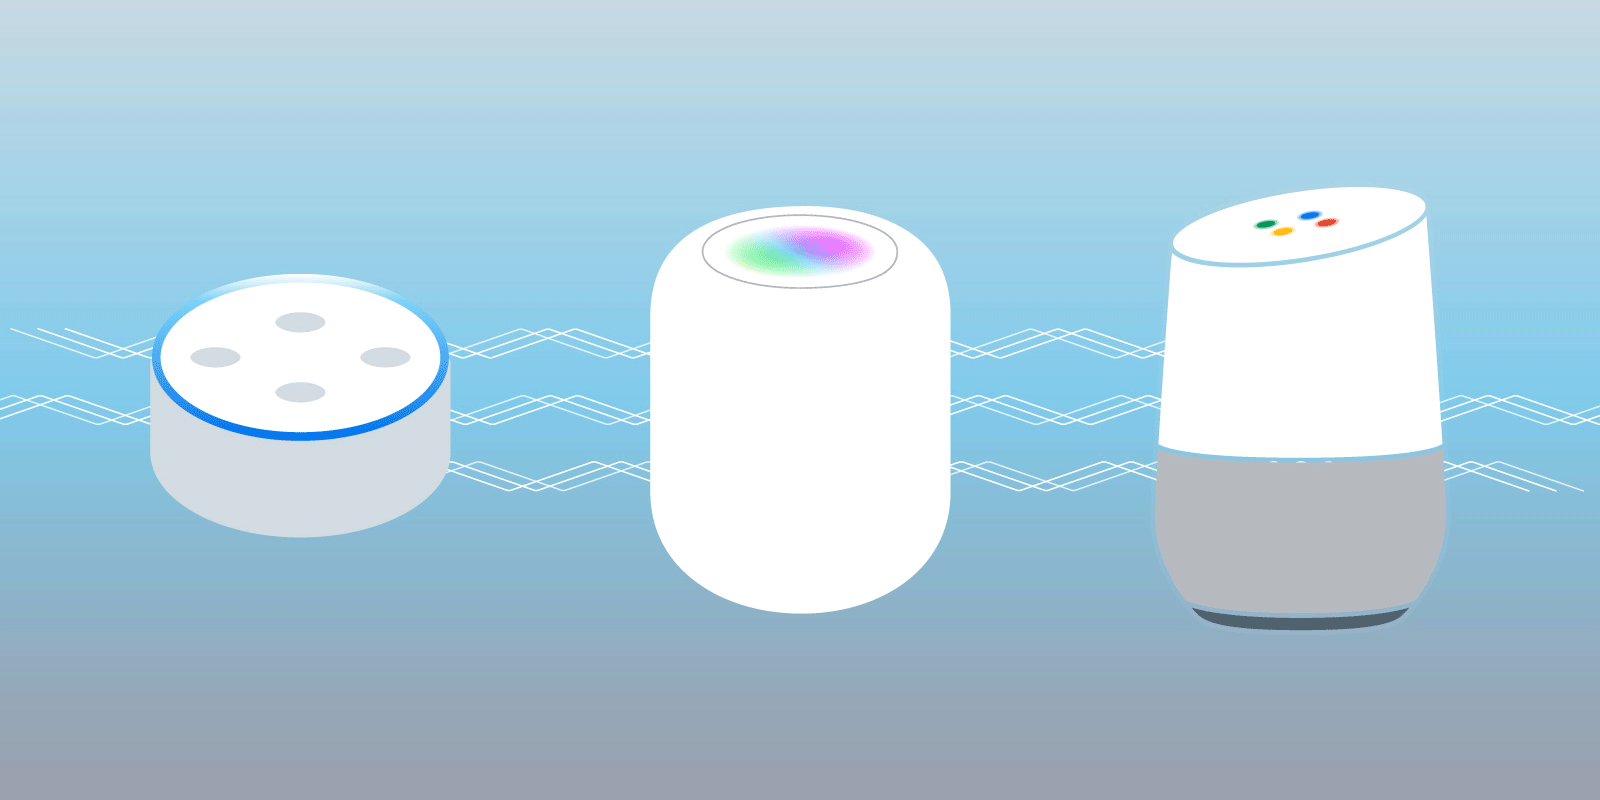 graphic showing three different smart speaker devices